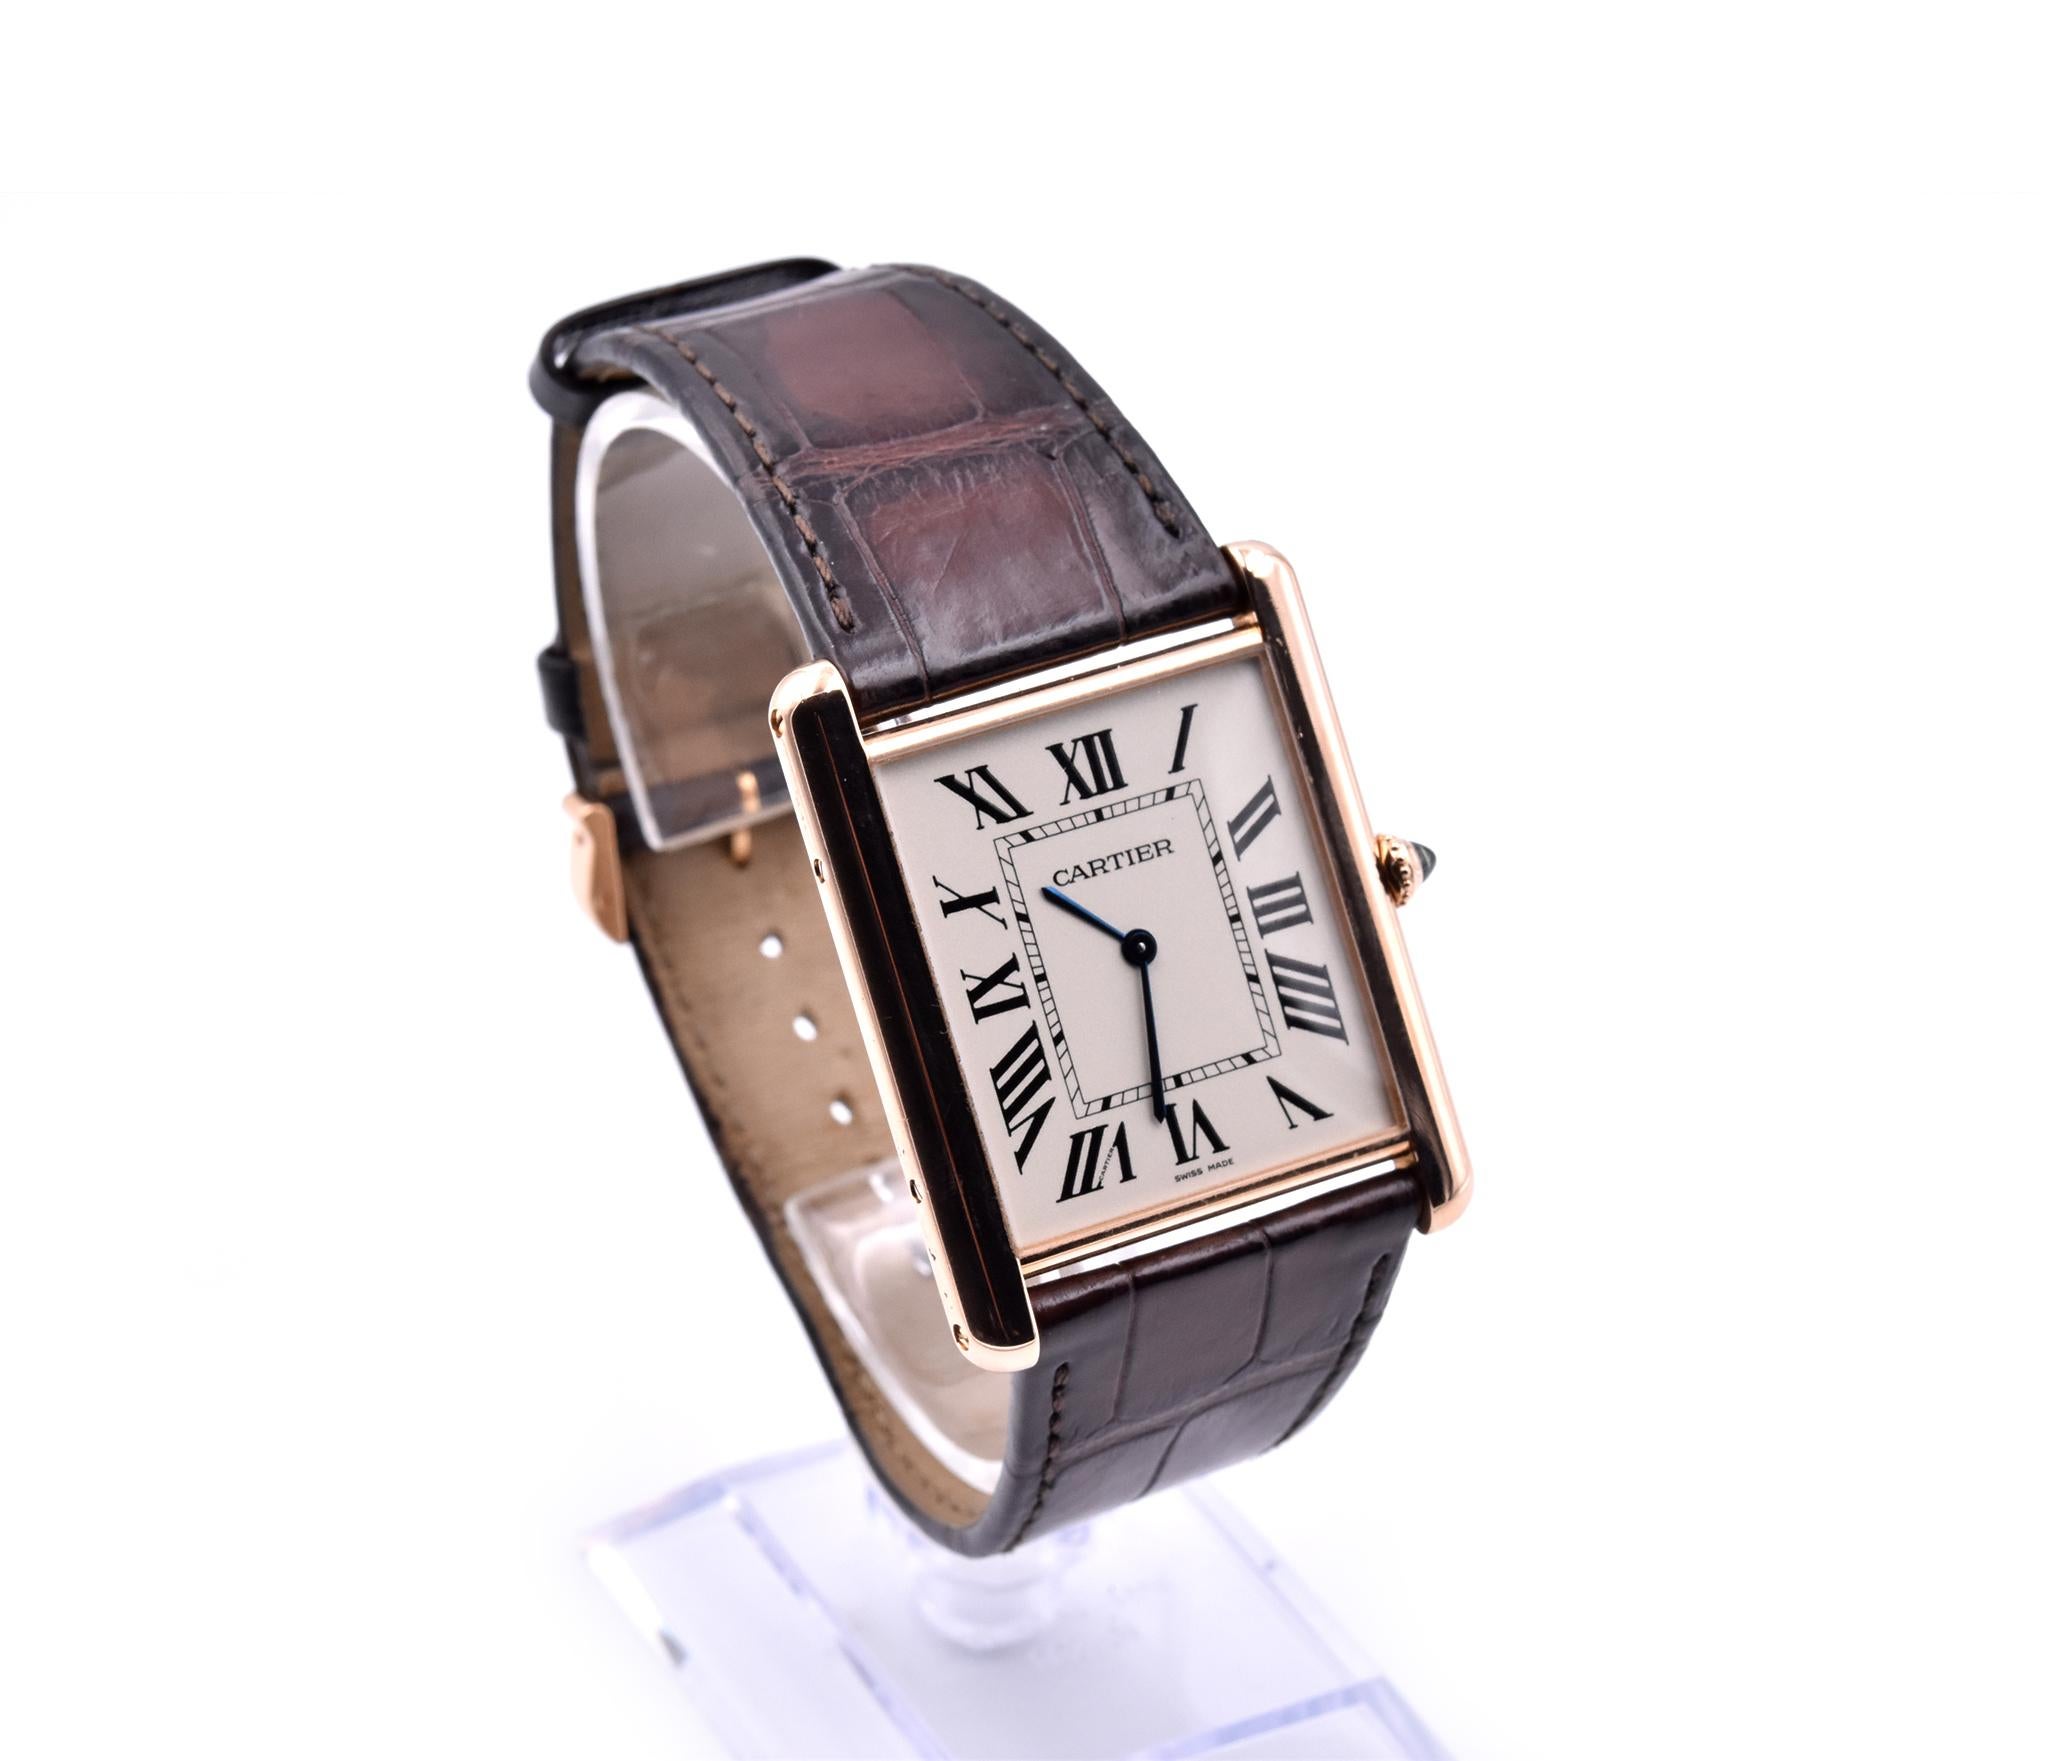 Movement: mechanical
Function: hours, minutes
Case: rectangle 32.30x40.40mm 18k rose gold case, sapphire protective crystal, pull/push crown with cabochon sapphire
Dial: silvered dial, blued-steel sword shaped hands, black Roman numerals
Band: